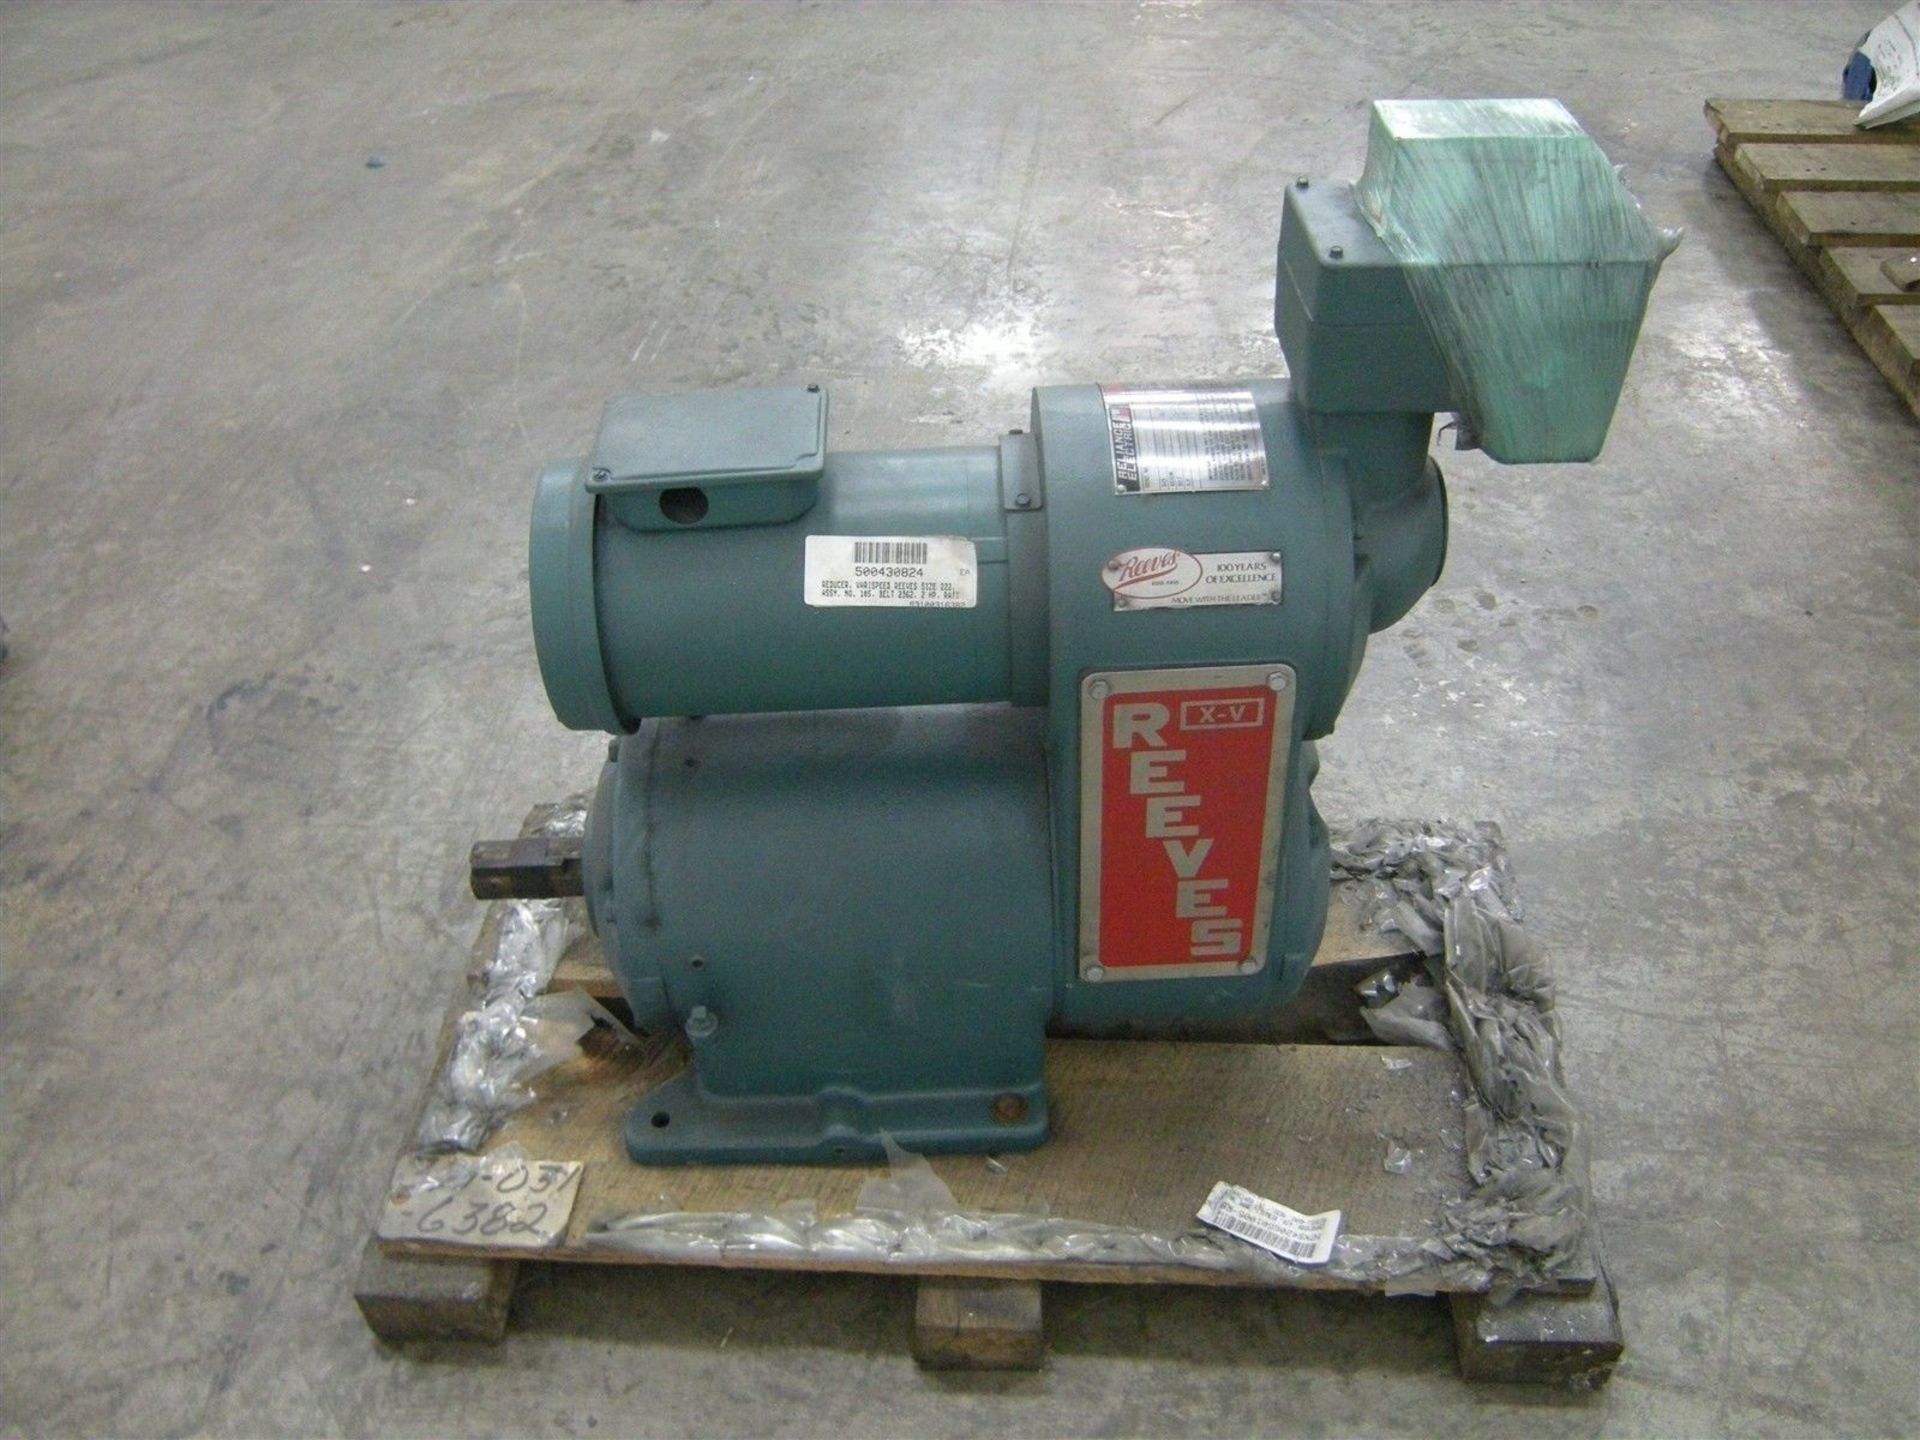 Reeves Vari speed Reducer MFC100158 2HP, Size 222 Gear Ratio 20.9 (Rigging Fee - $95) - Image 2 of 8